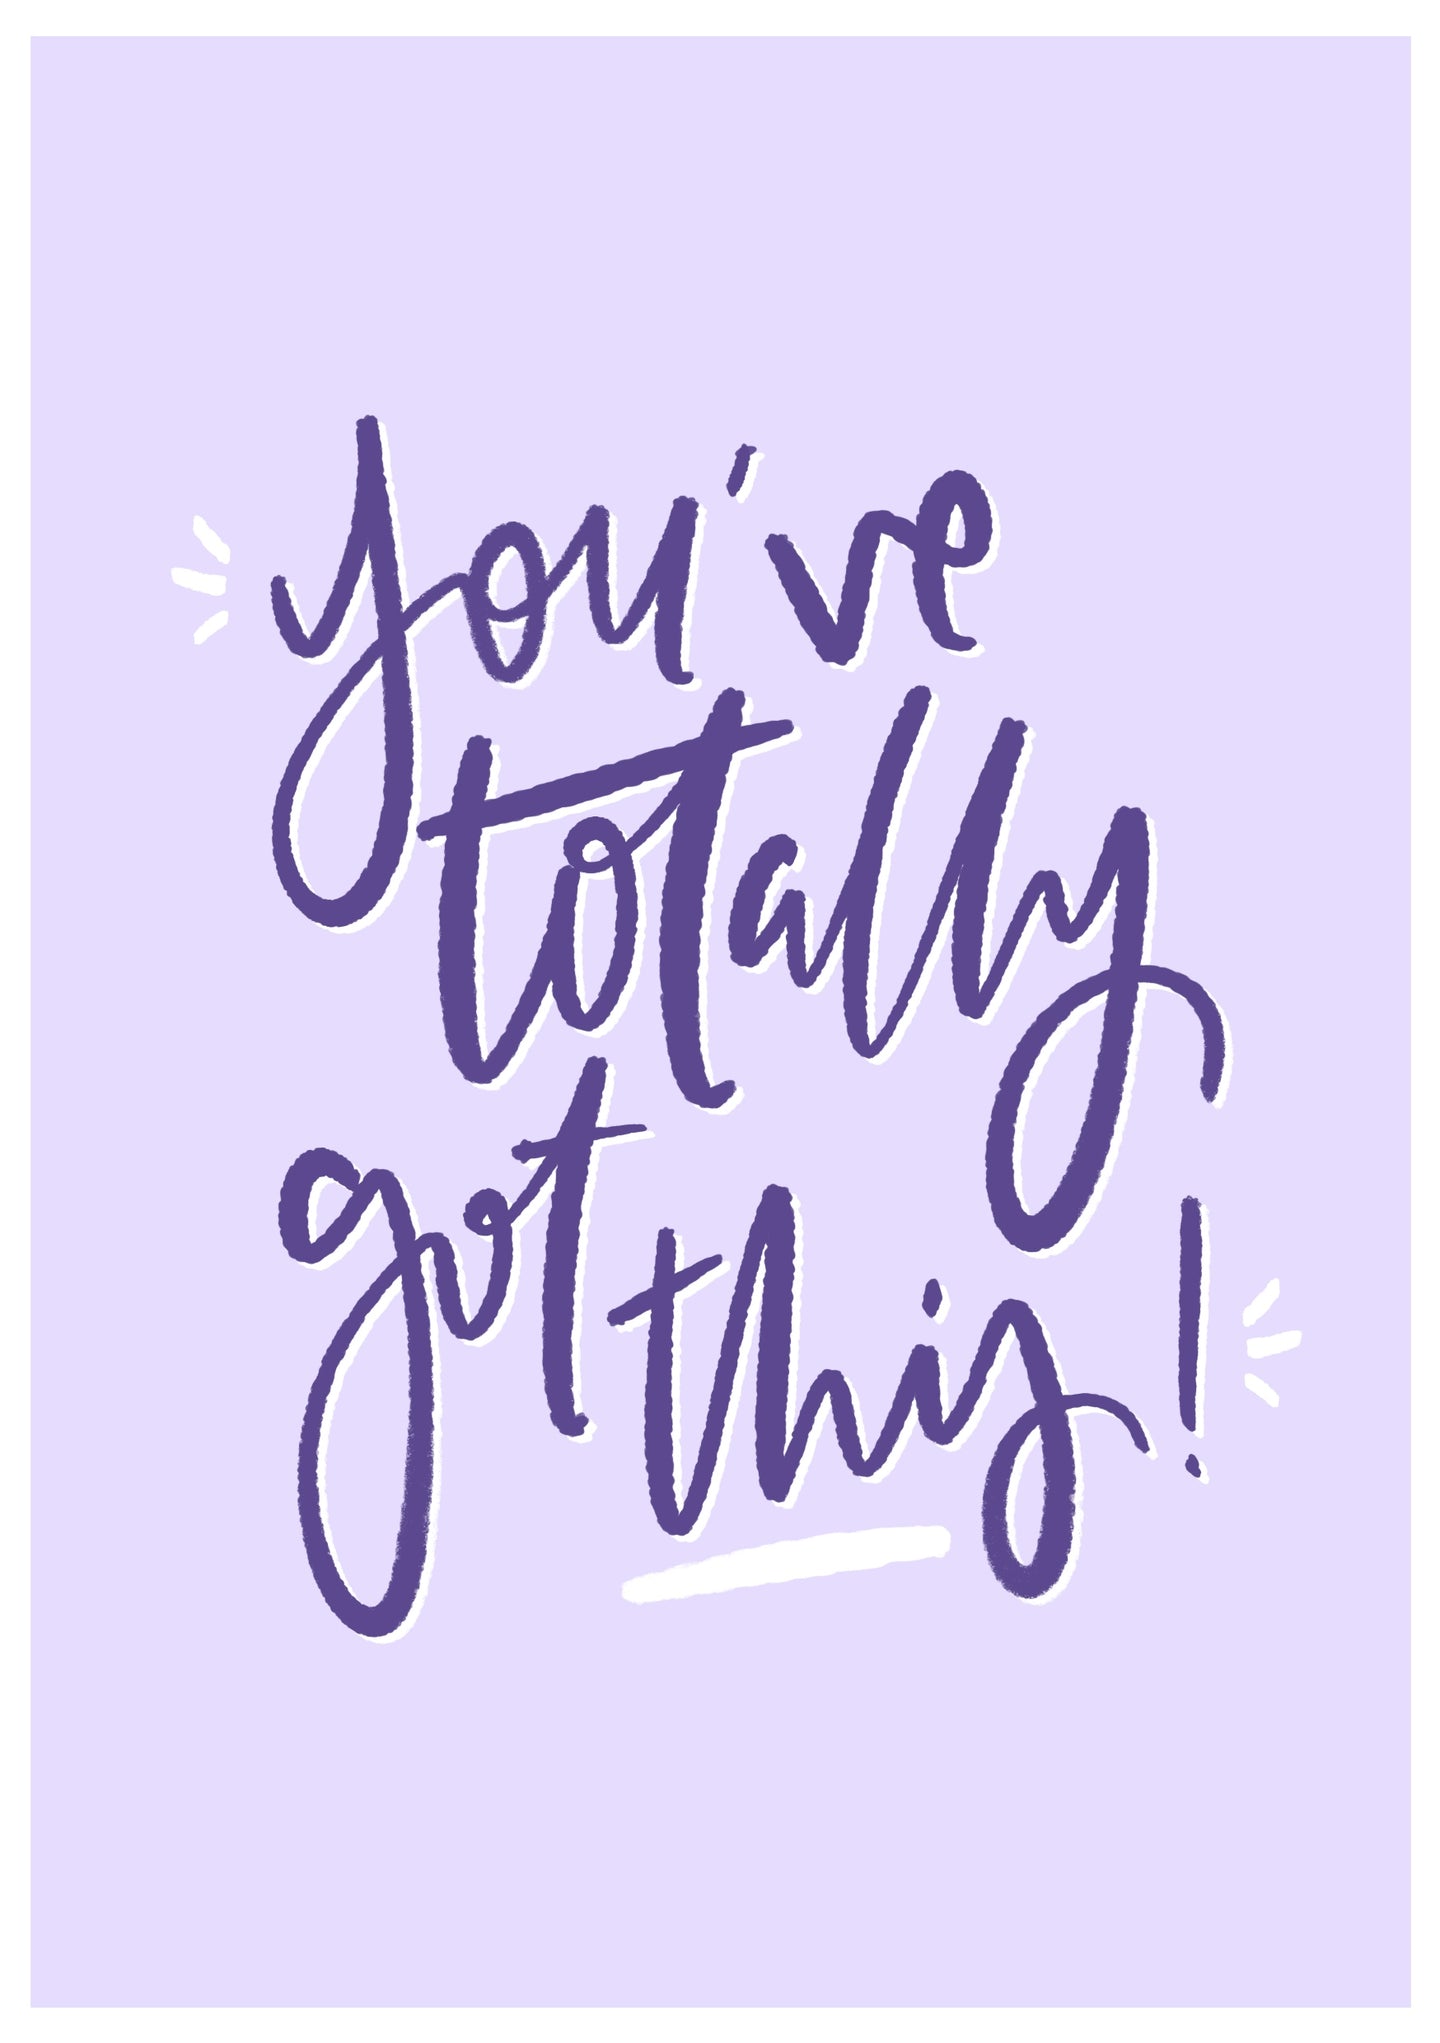 You've Totally Got This A5 Print